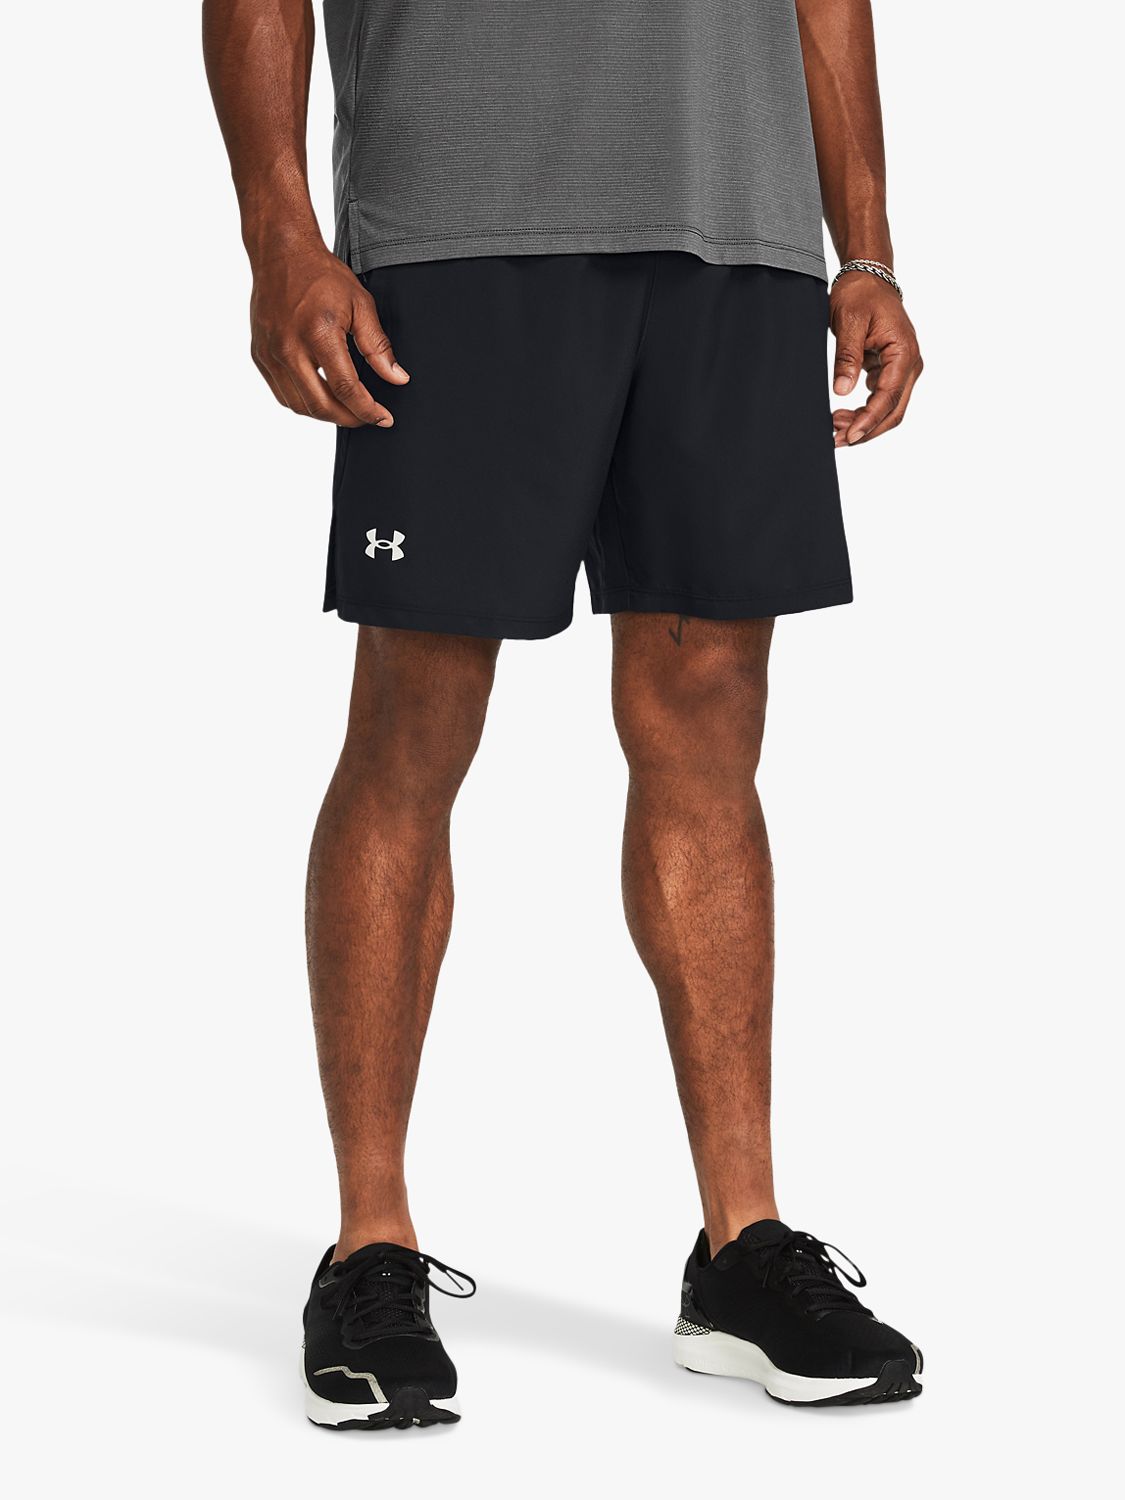 Under Armour, UA Elevated Navy Blue, Woven Graphic Shorts, Mens Medium